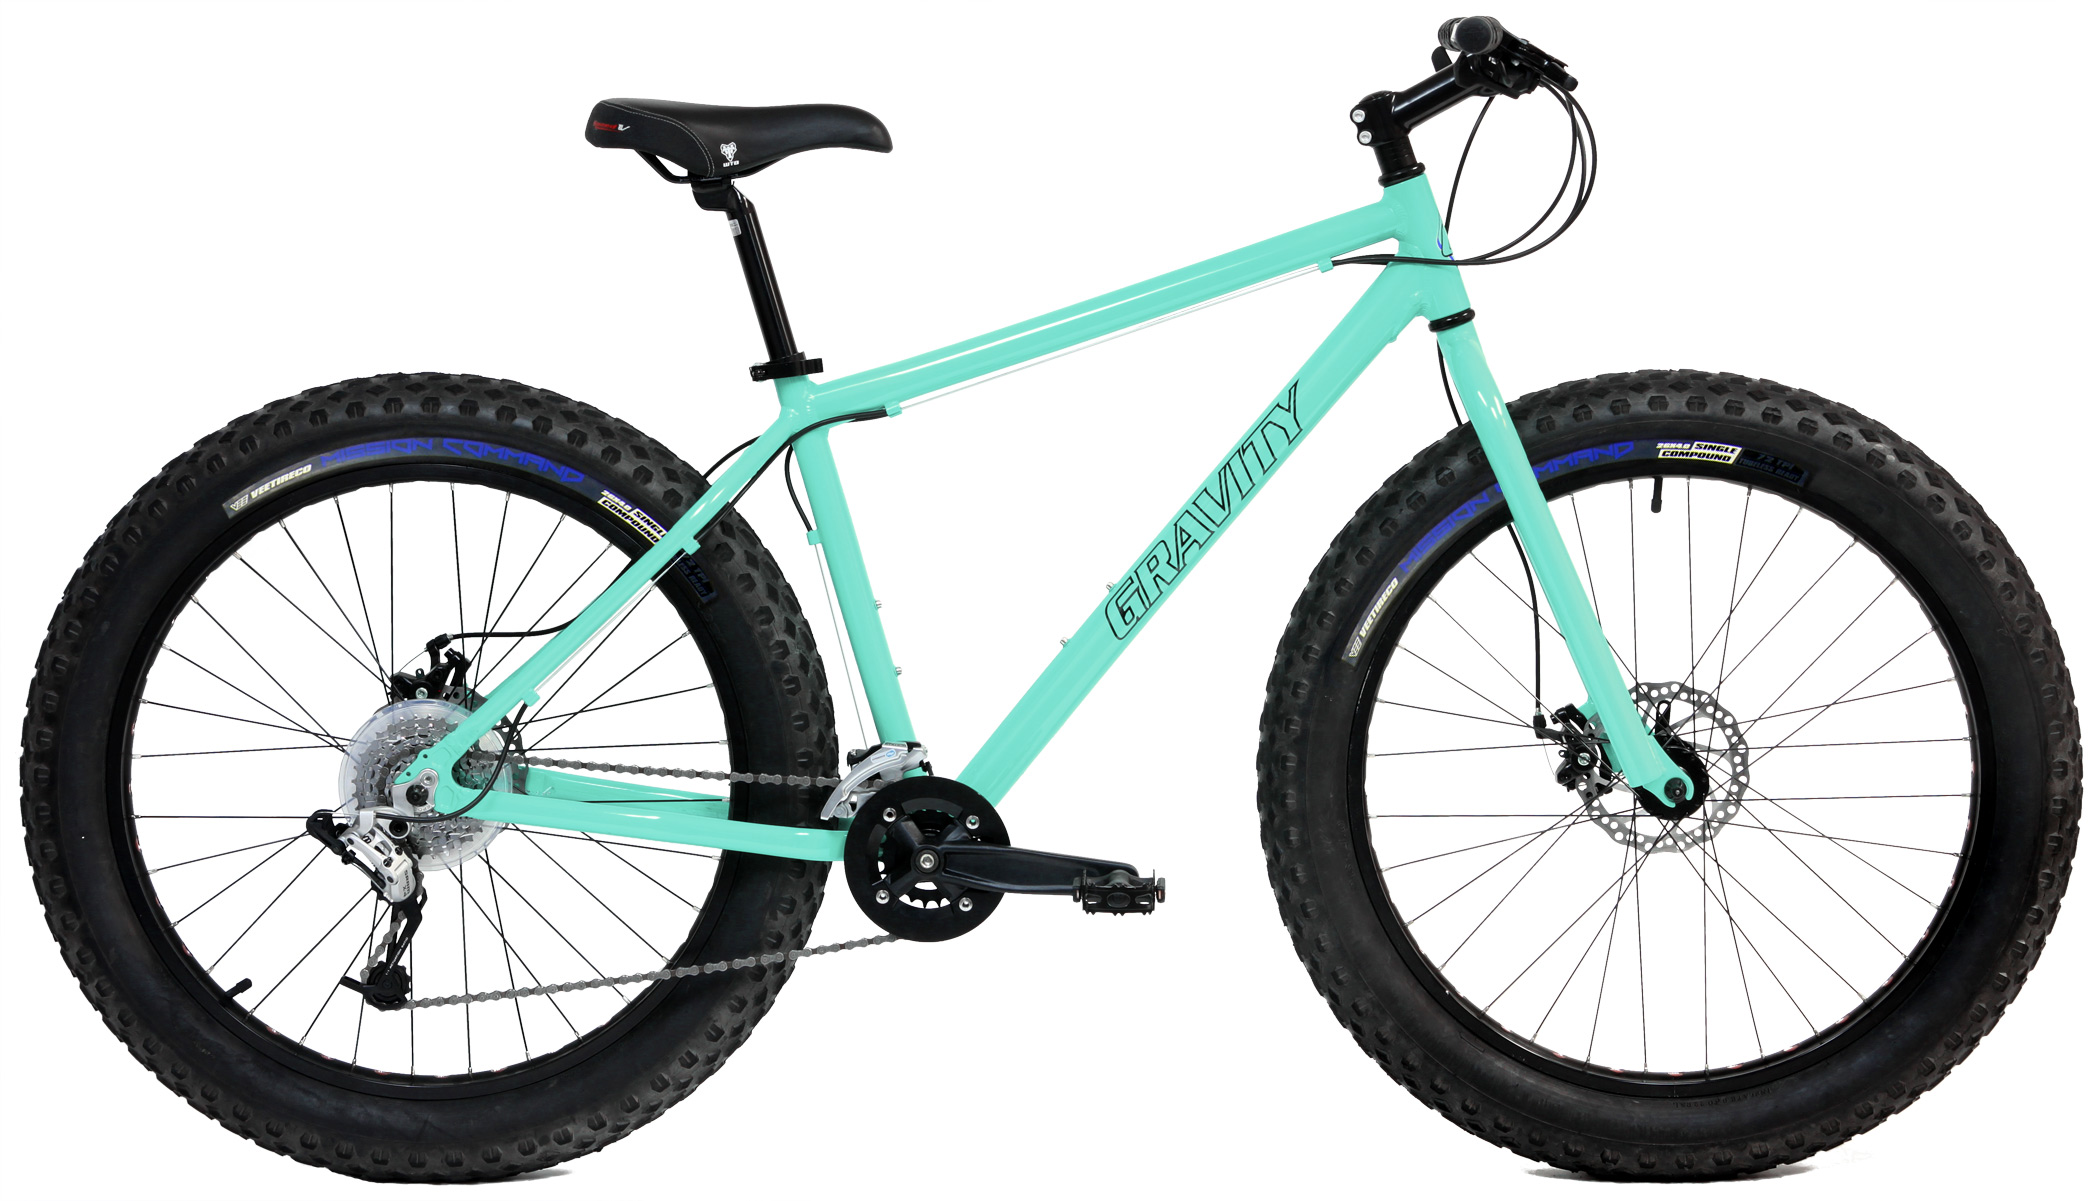 Save up to 60% off new Fat Bikes and Mountain Bikes - MTB - Gravity